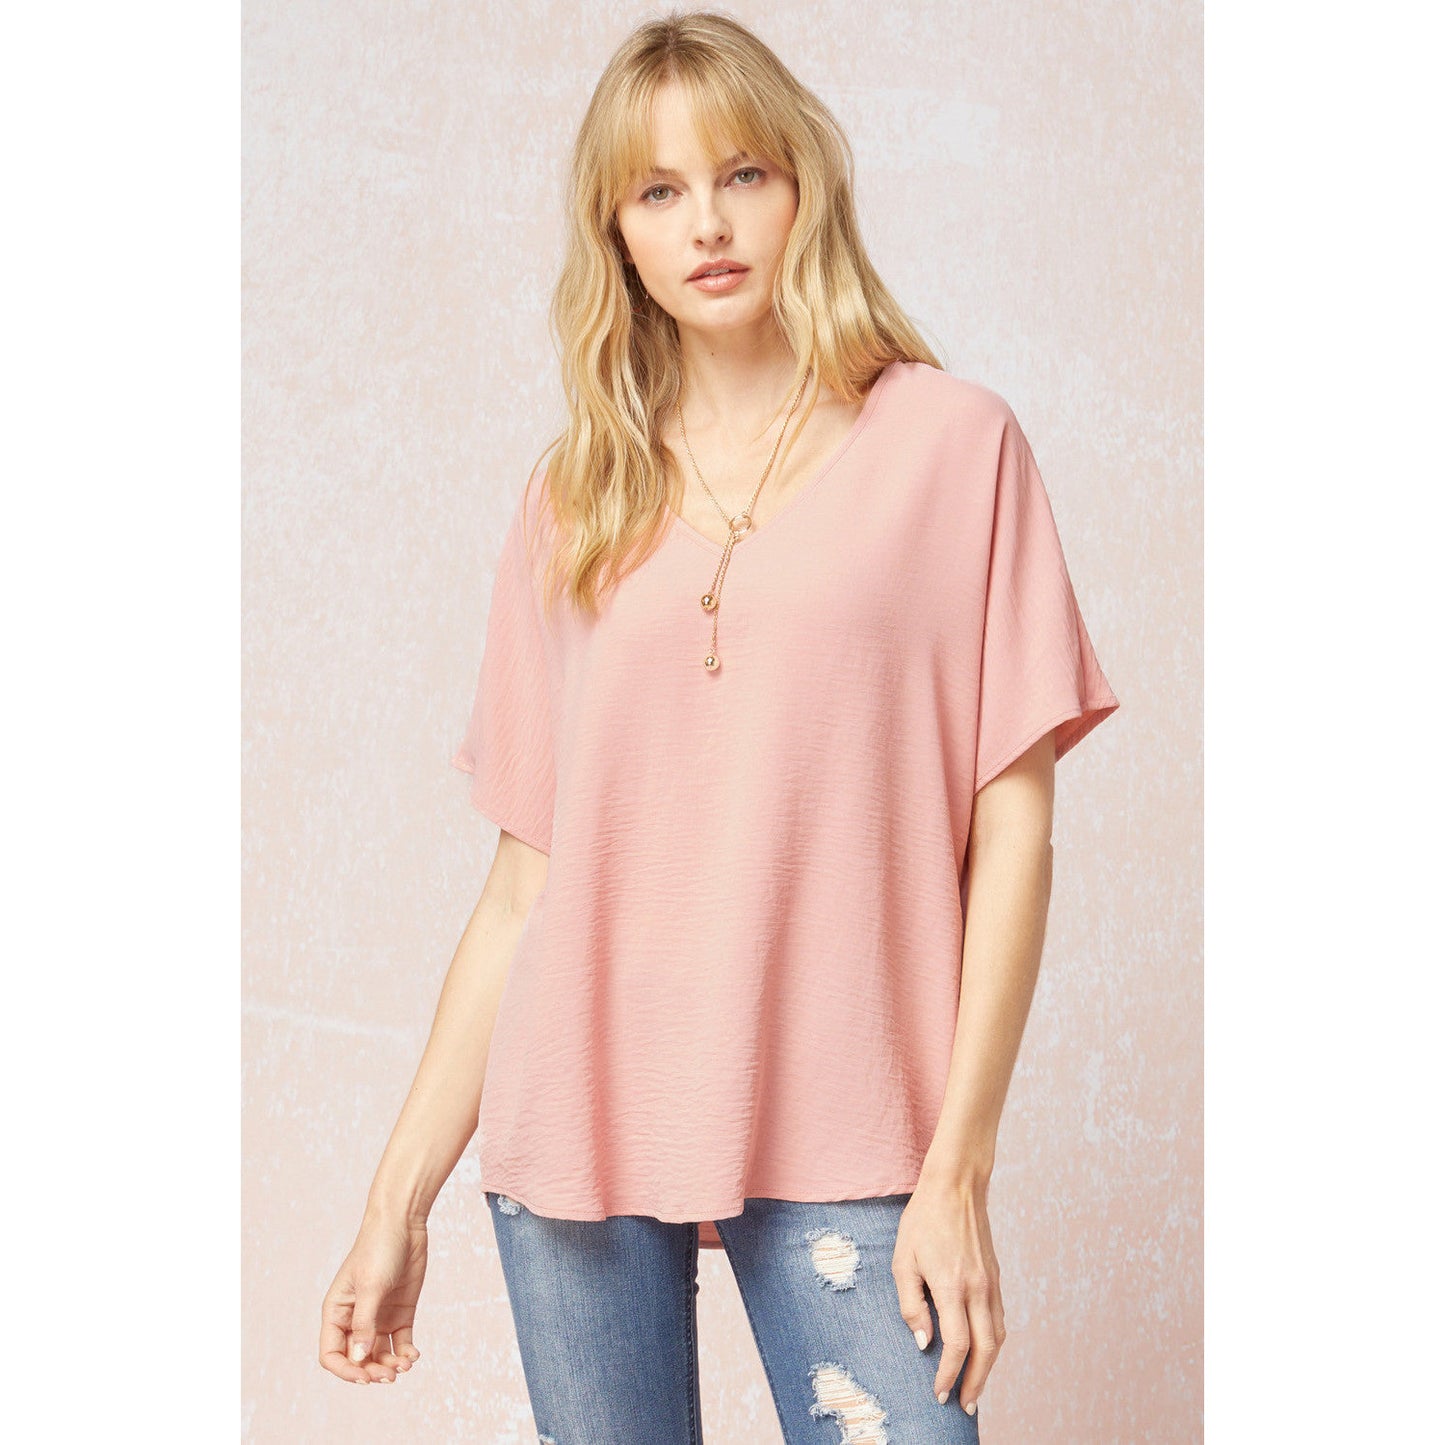 ENTRO EVERYDAY TOP BABY PINK 4561